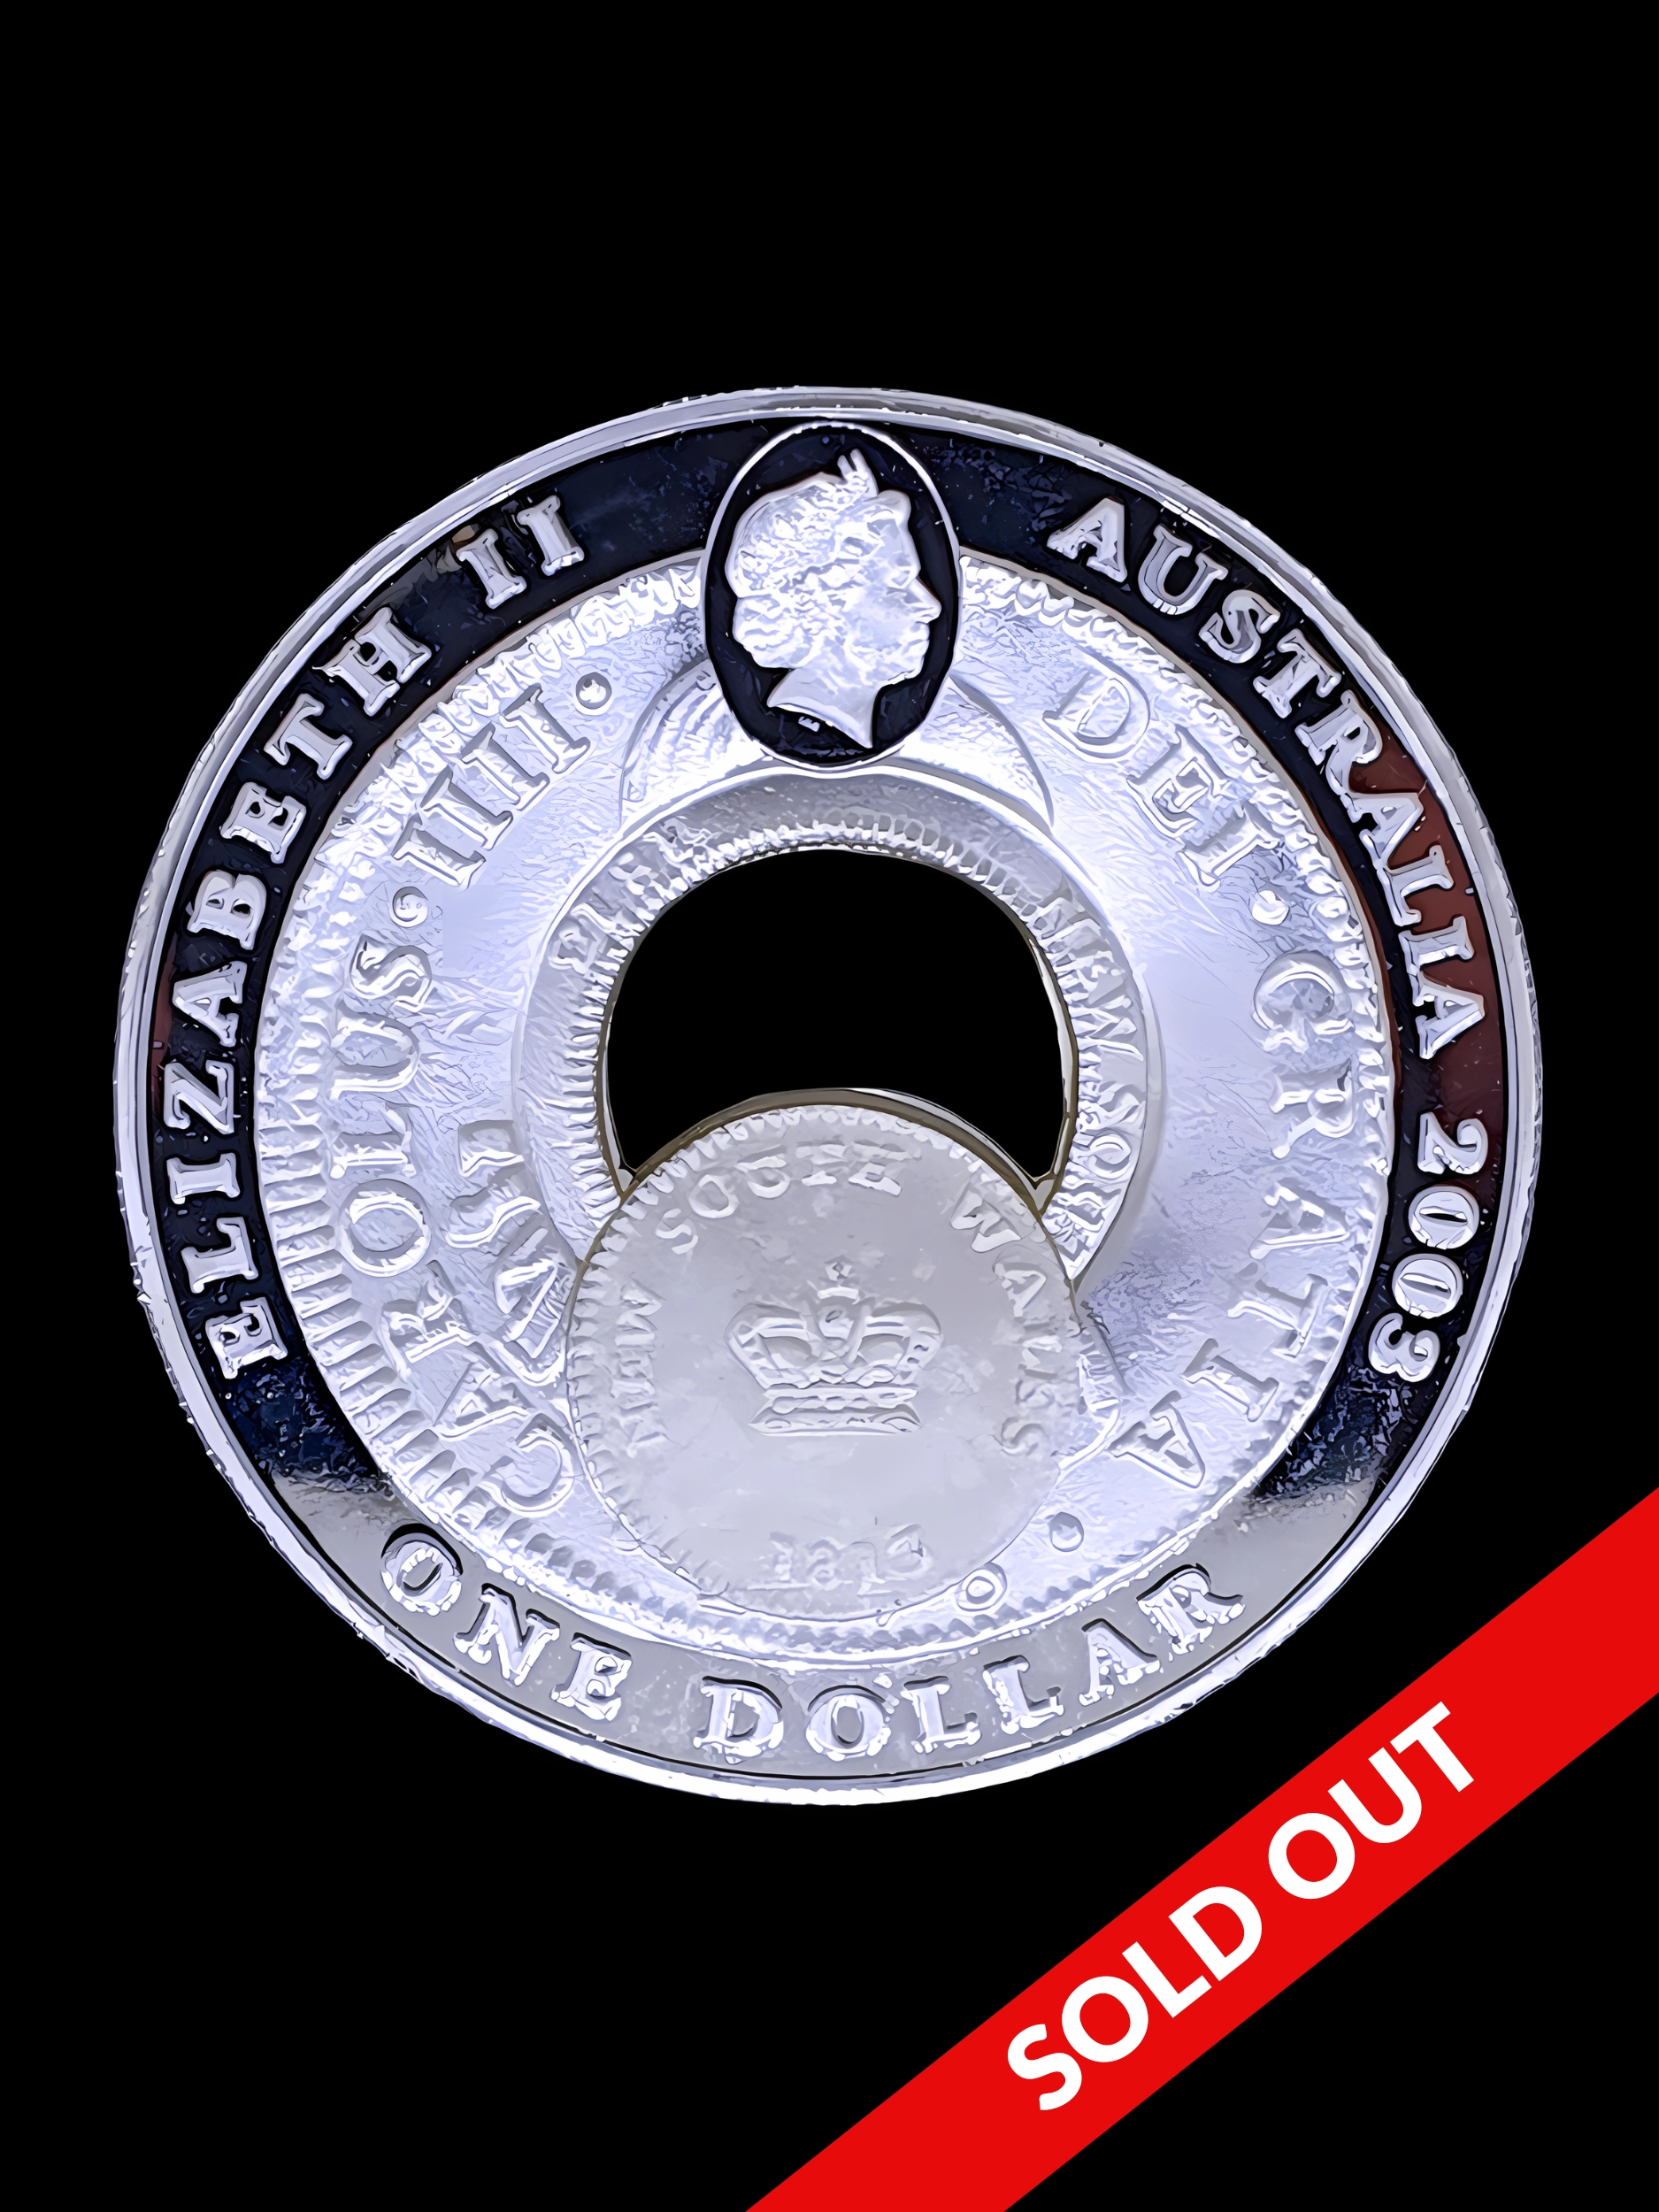 2003 Holey Dollar and Dump Australian One Dollar New South Wales Silver Coin